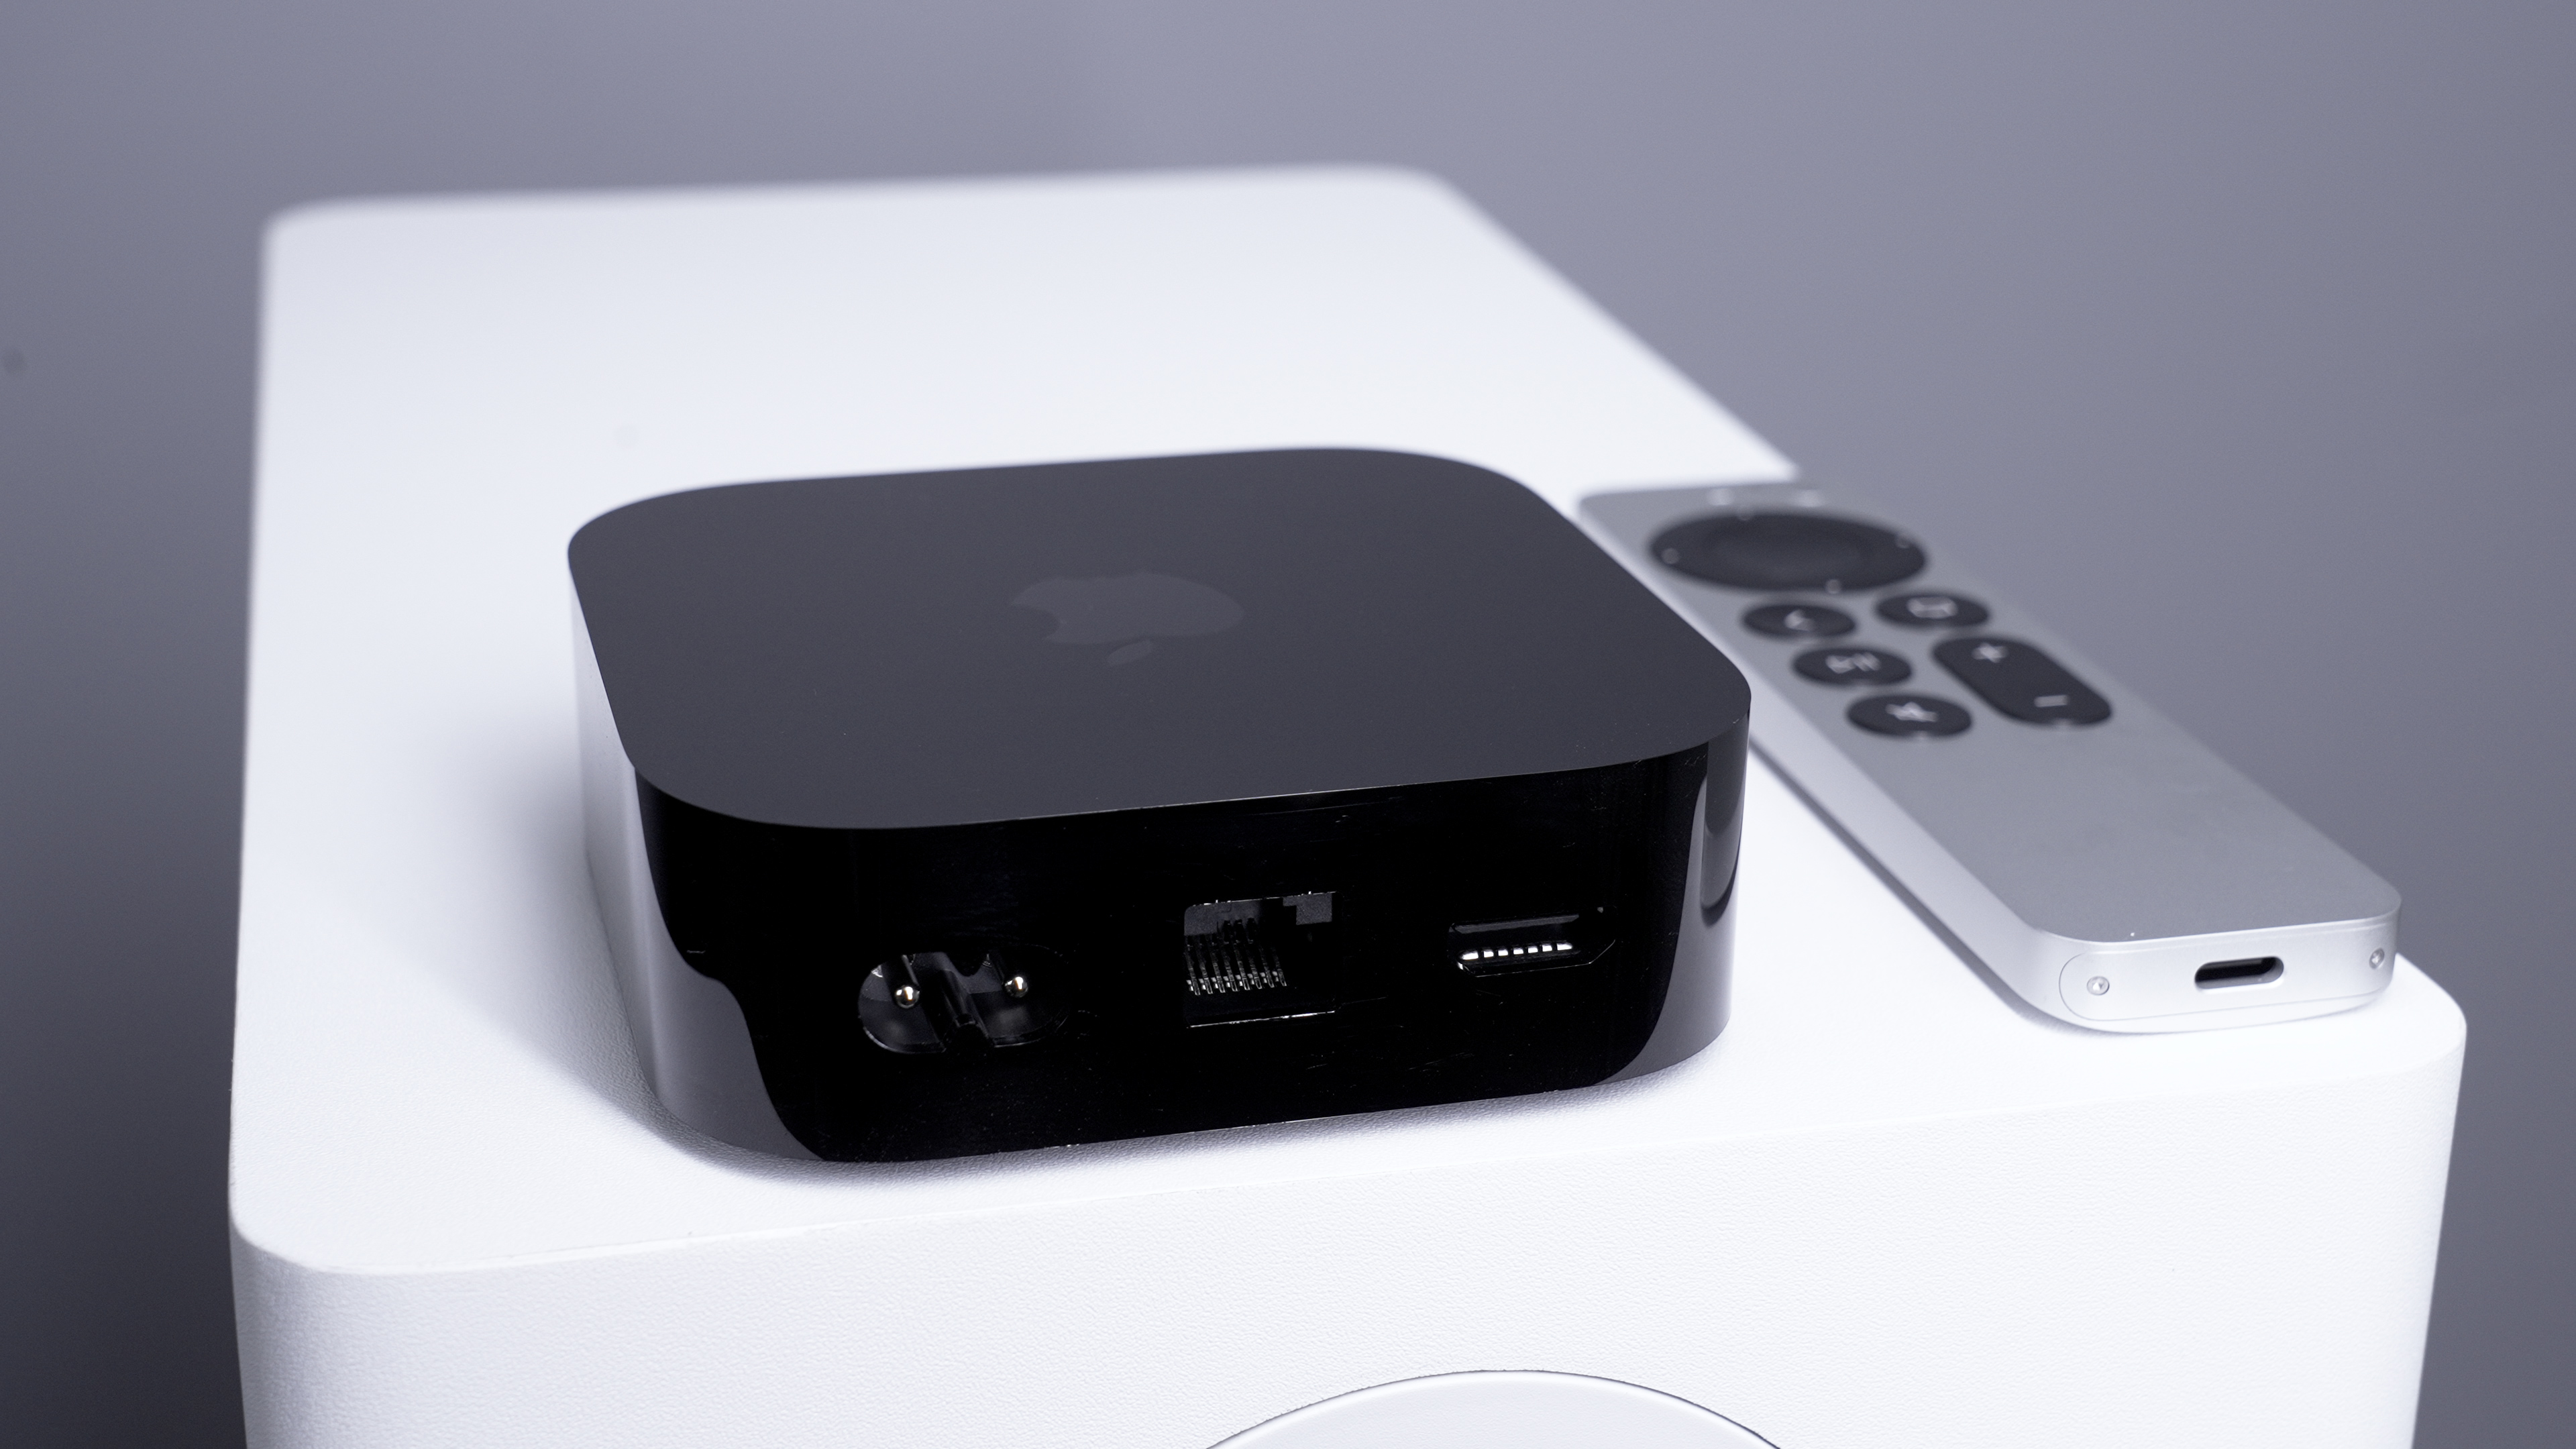 The rear view of an Apple TV 4K showing gigabit ethernet port, HDMI port, and power port, with the Siri remote alongside in the 